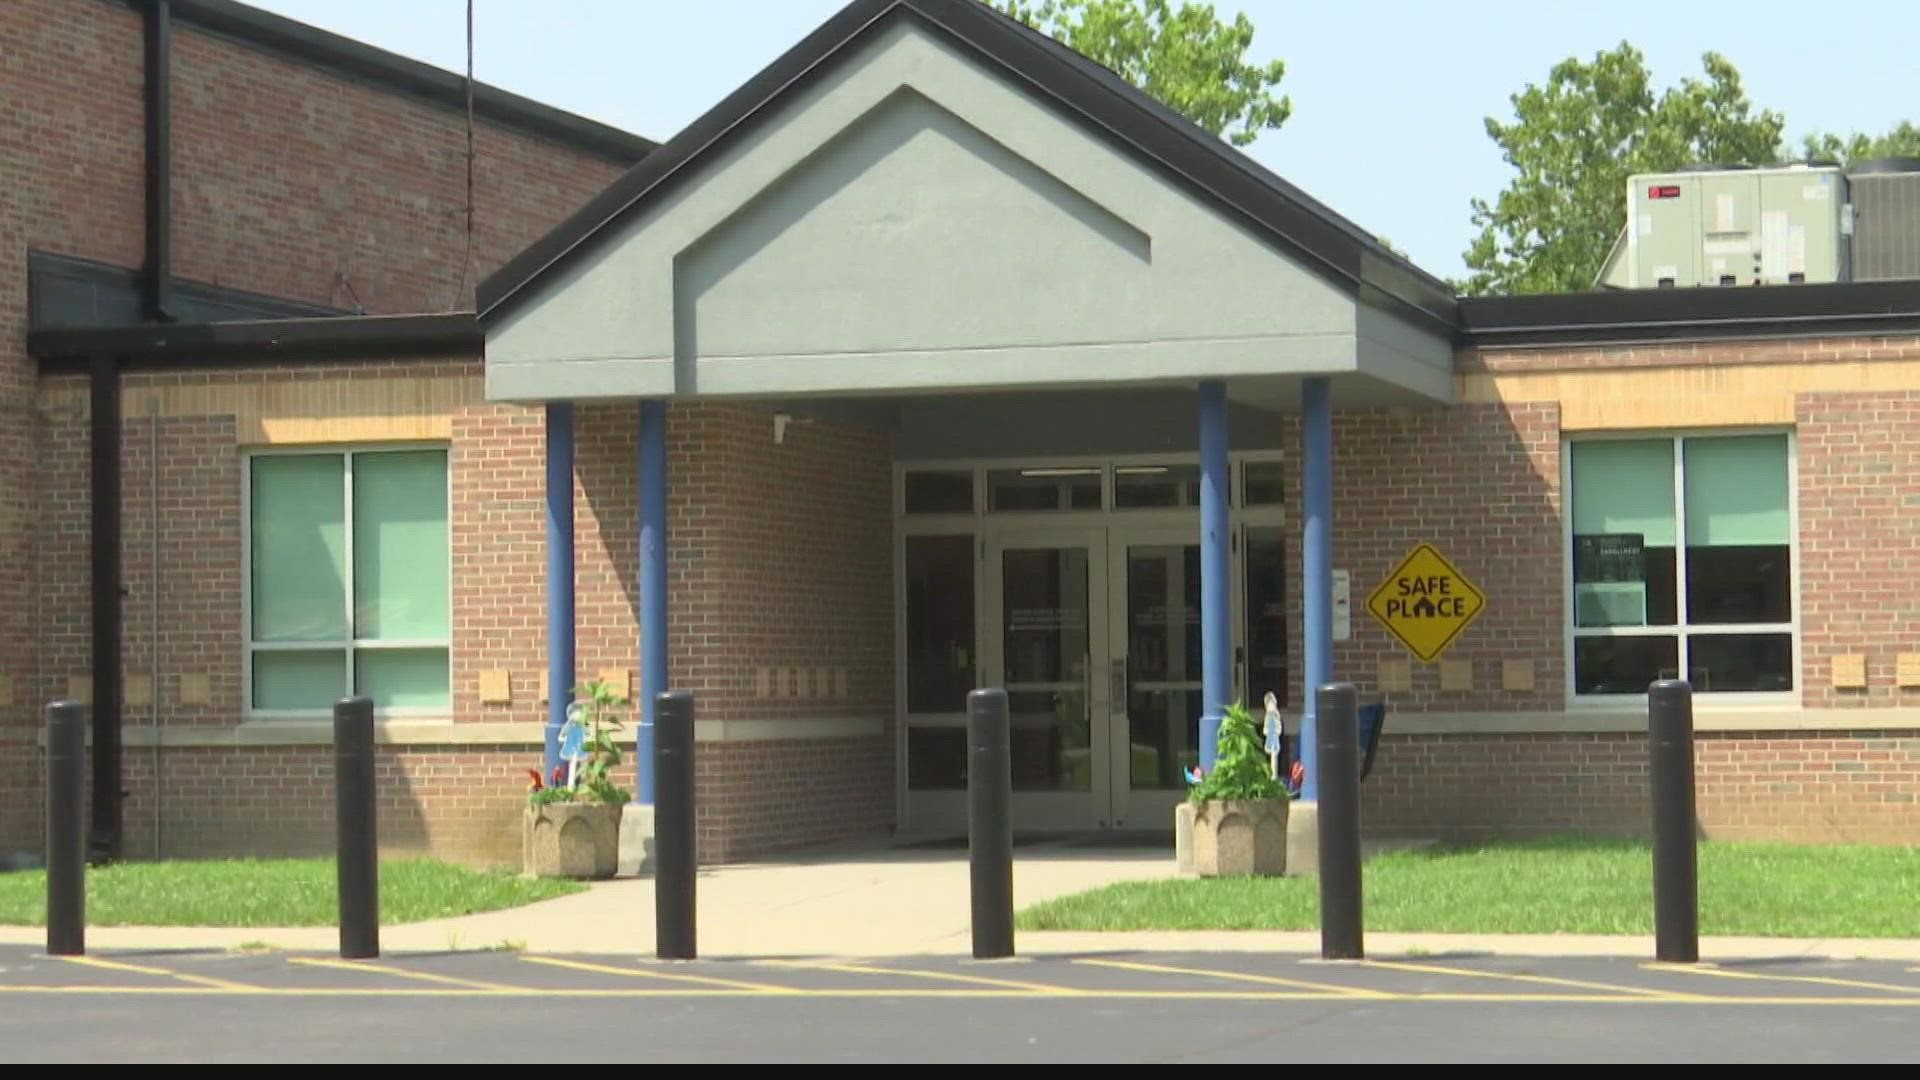 More than 60 of the roughly 300 students and staff at Helmsburg Elementary either have COVID, were traced as close contacts, or were absent with possible symptoms.